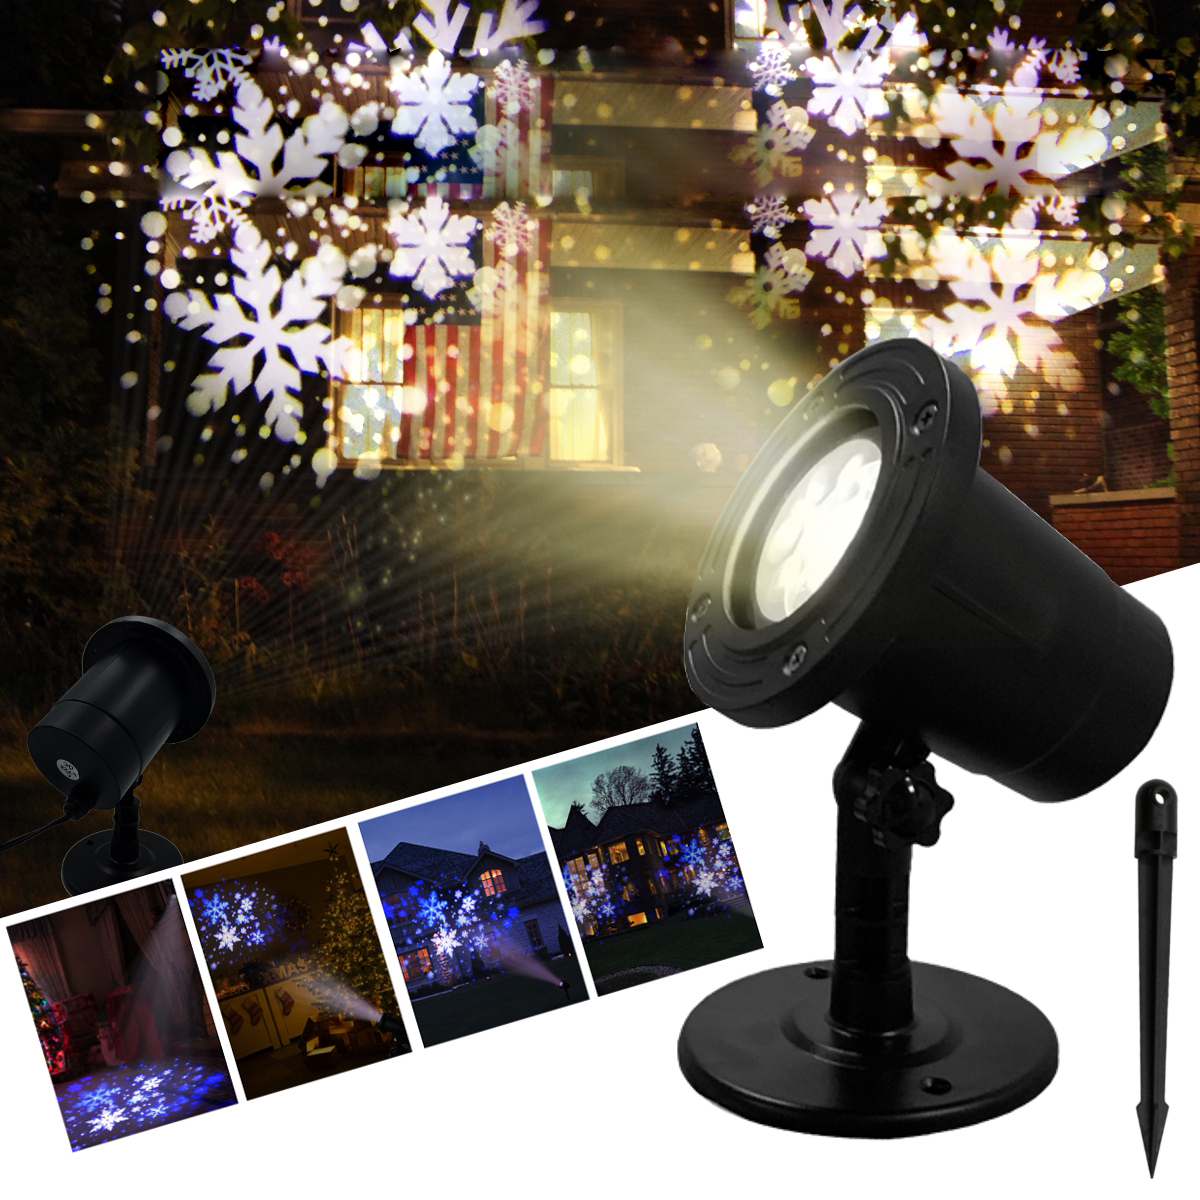 

Snowflake Laser LED Projector Stage Light Landscape Outdoor Garden Xmas Party Decor